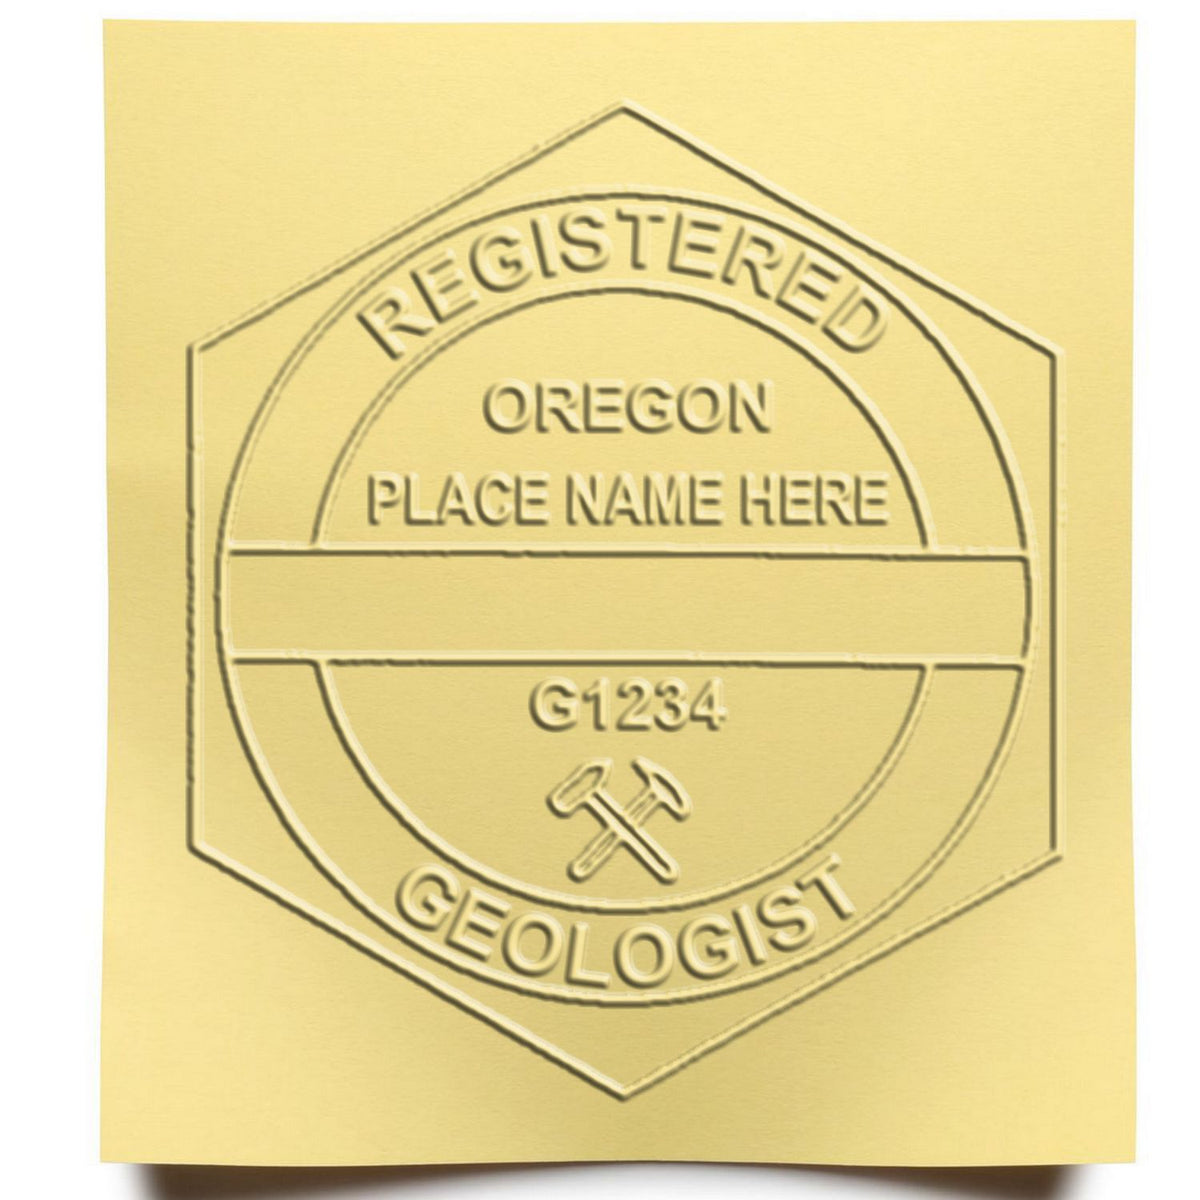 A lifestyle photo showing a stamped image of the Heavy Duty Cast Iron Oregon Geologist Seal Embosser on a piece of paper